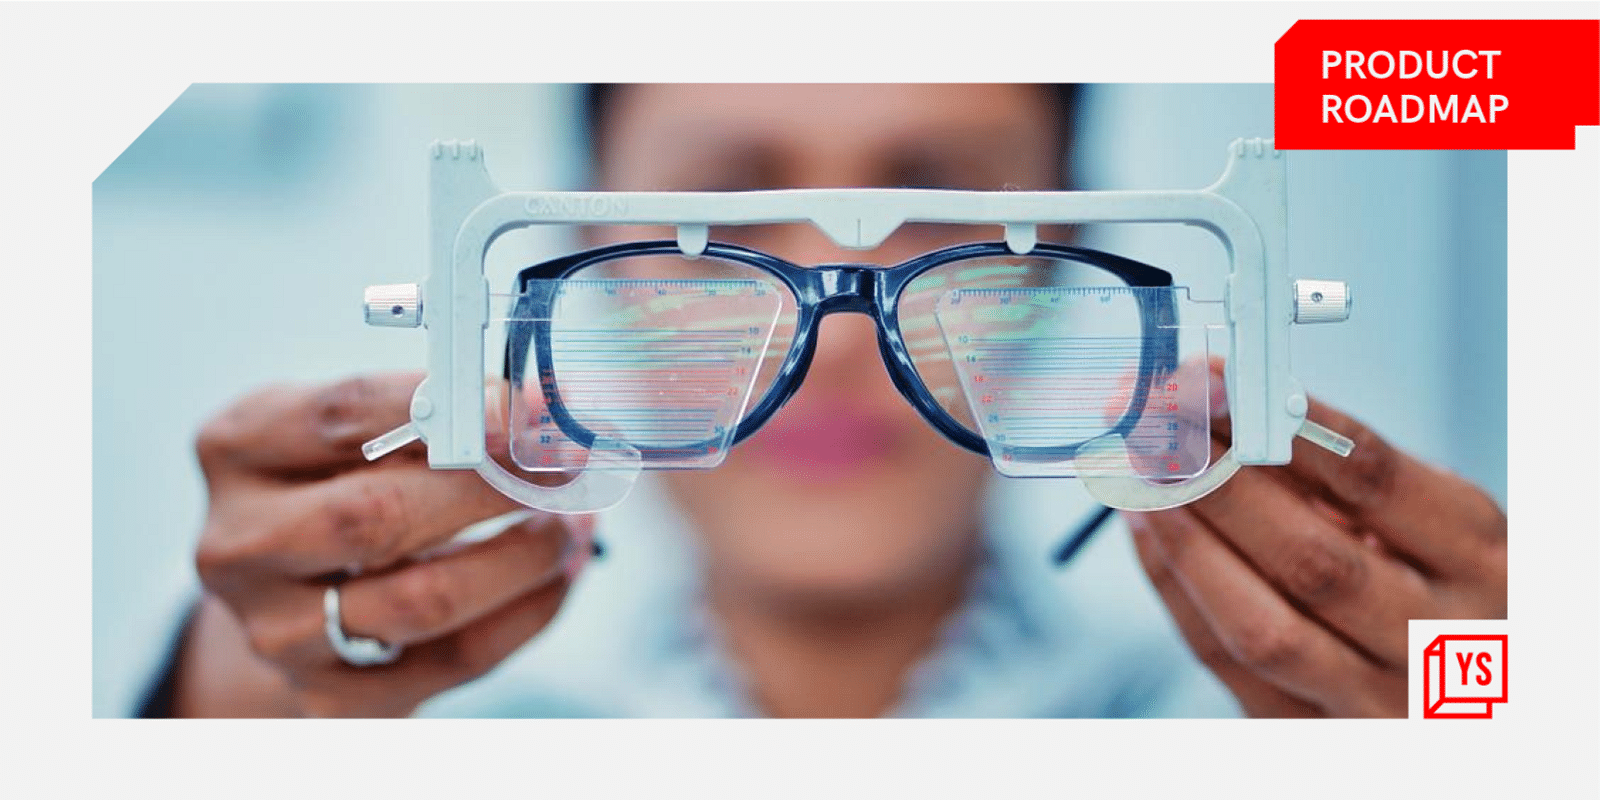 You are currently viewing [Product Roadmap] How technological advancements and innovation are helping grow the eyewear industry